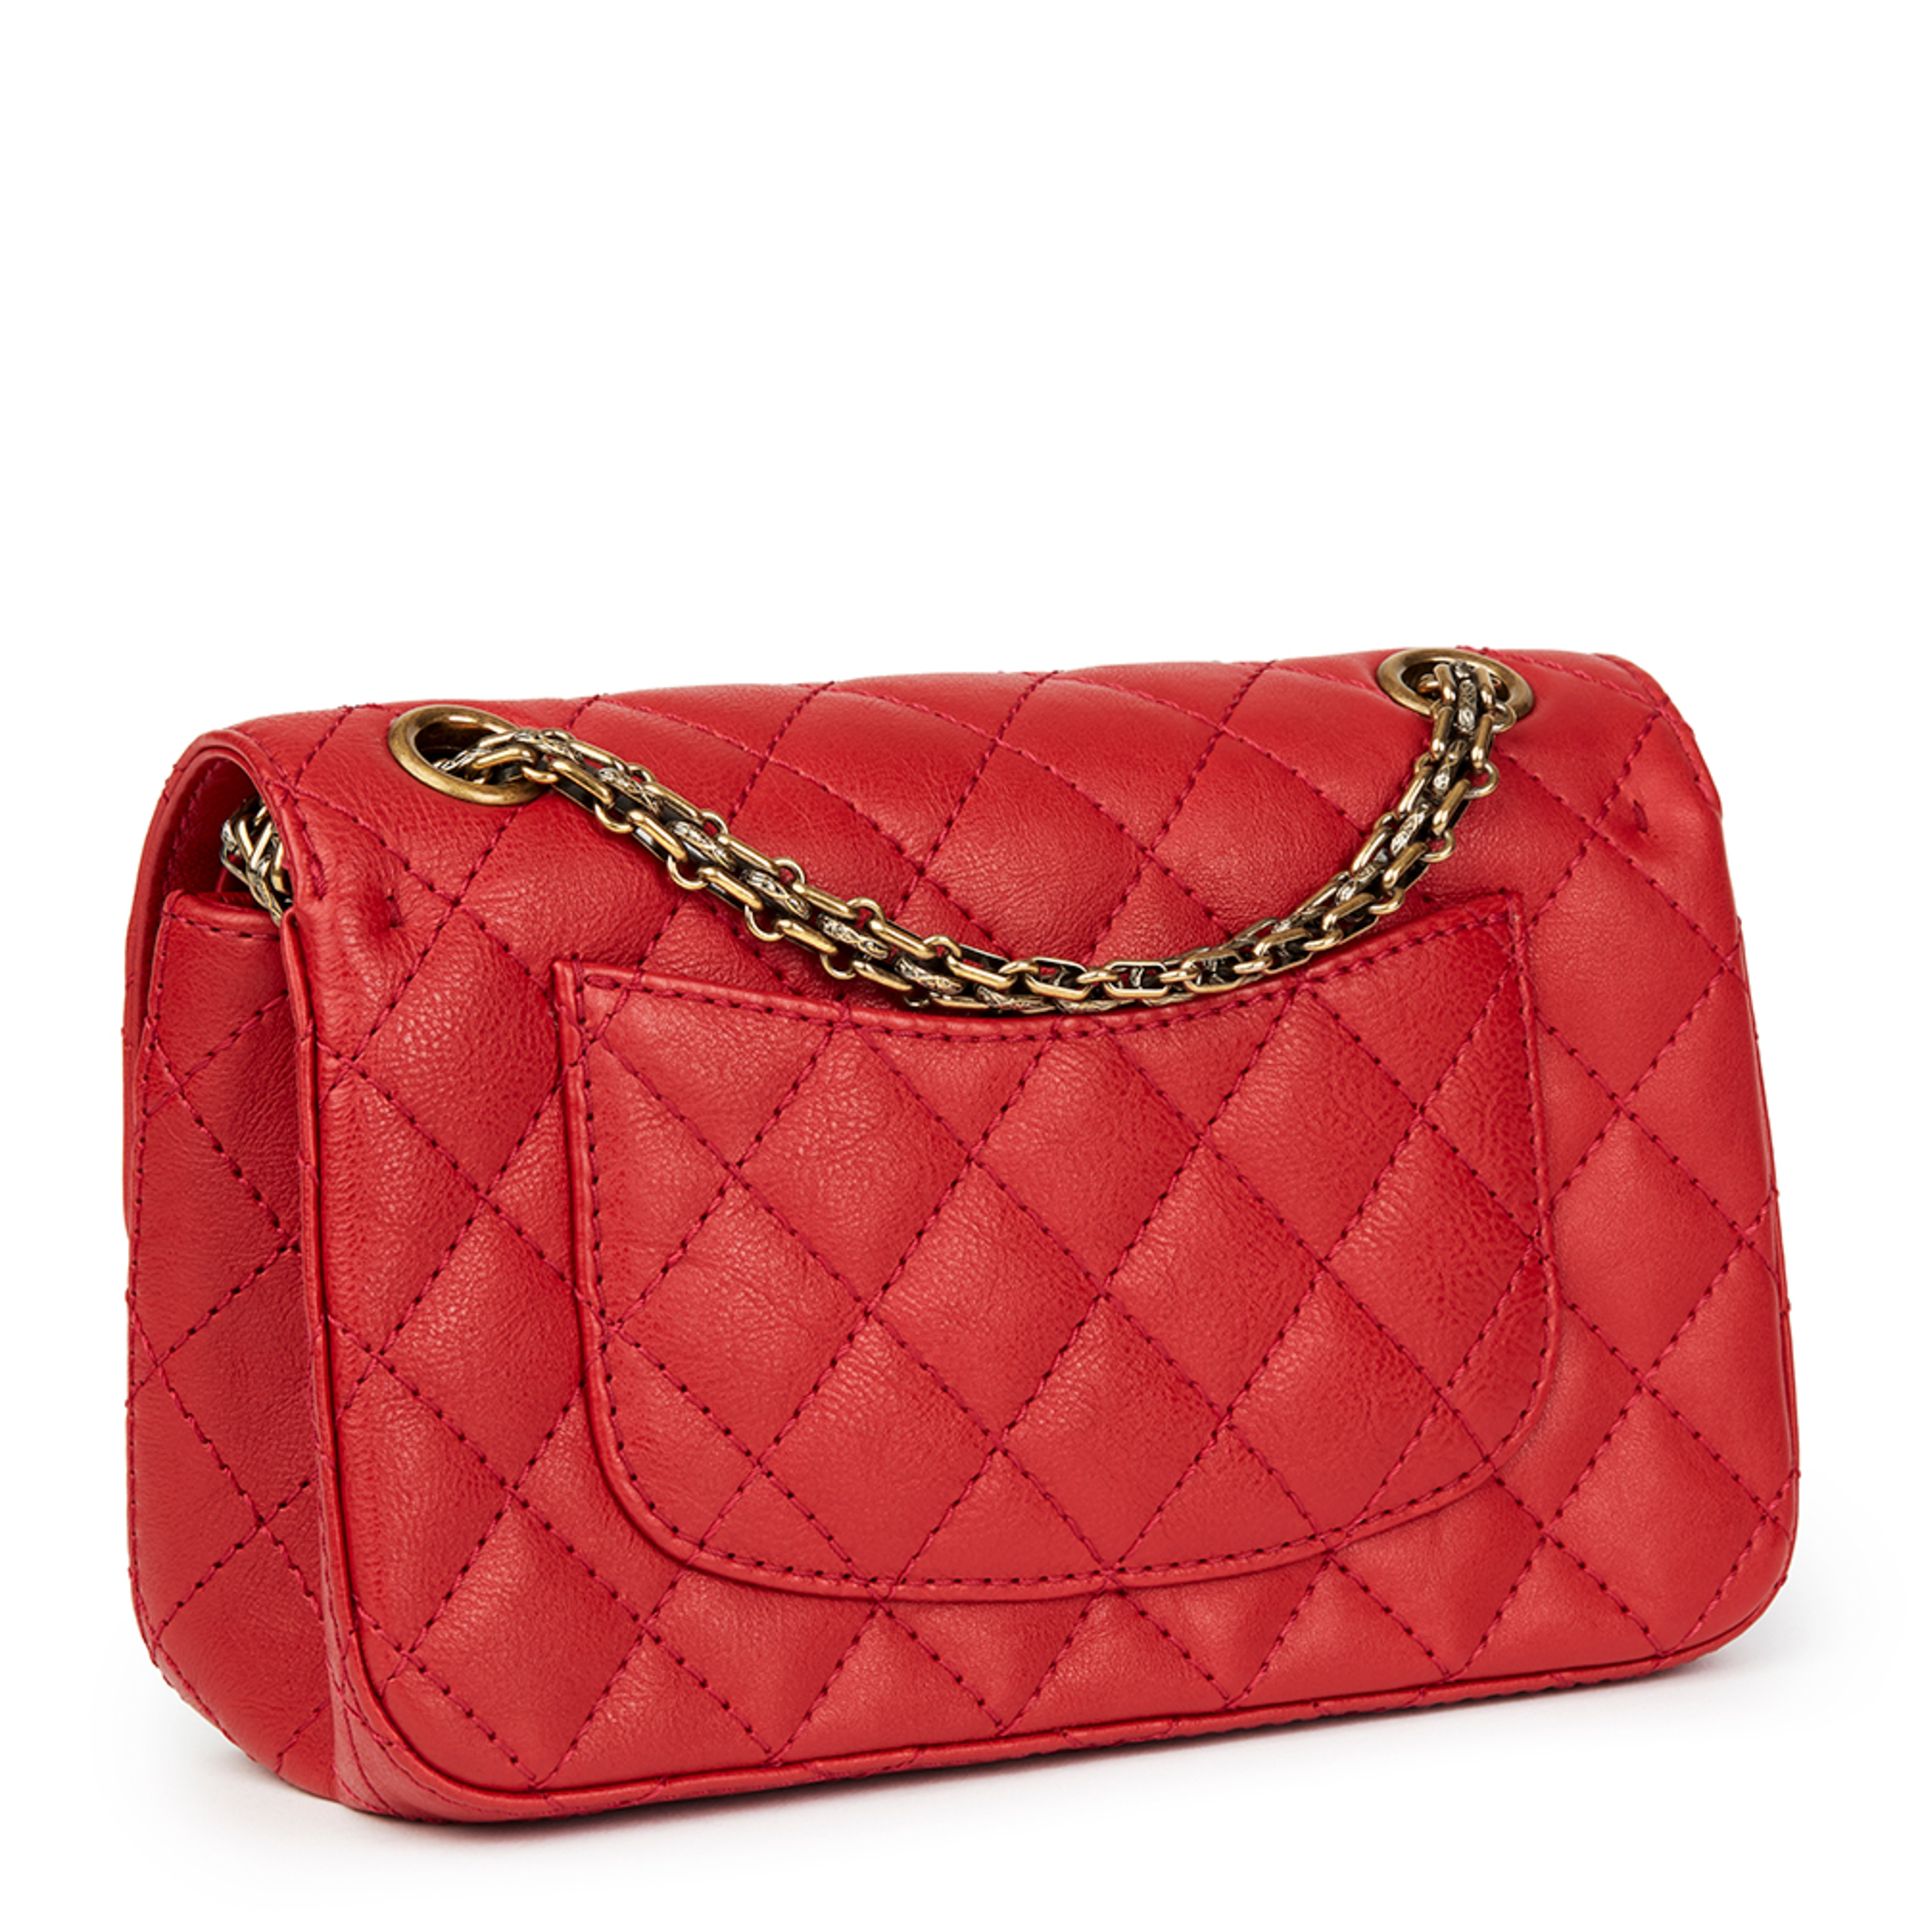 Chanel Red Quilted Calfskin Leather 2.55 Reissue 224 Double Flap Bag - Image 4 of 10